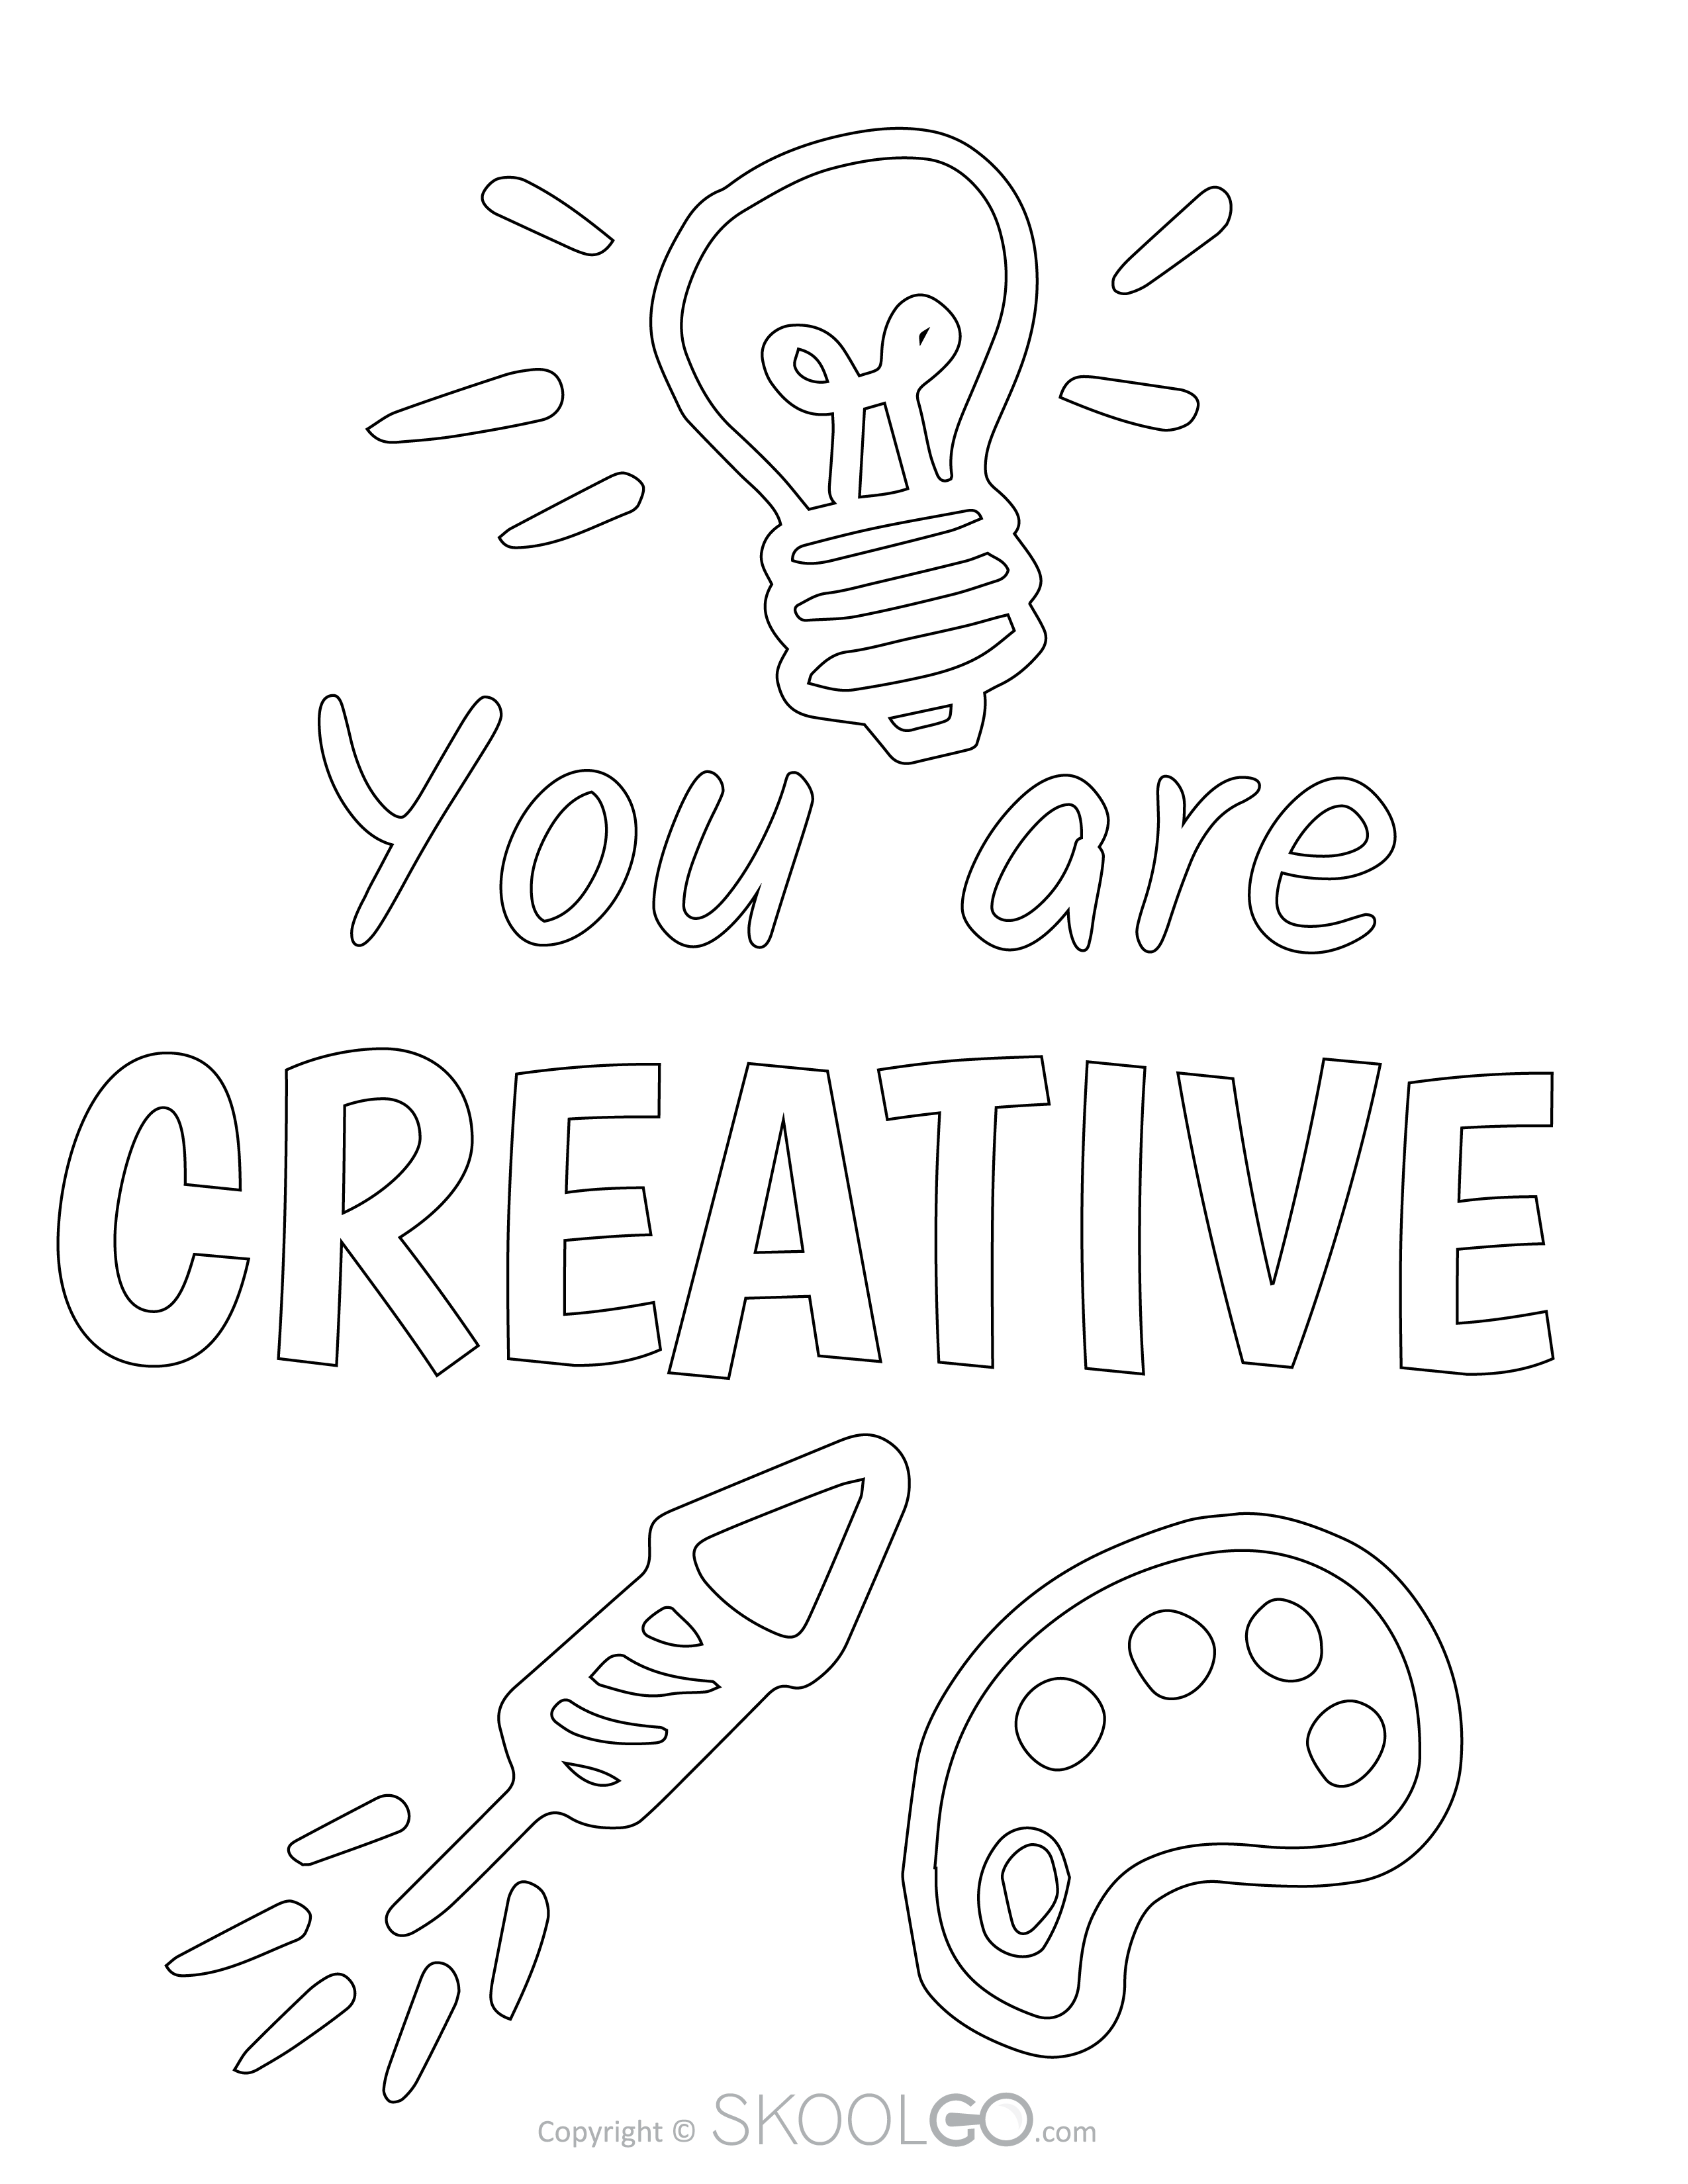 You Are Creative - Free Coloring Version Poster